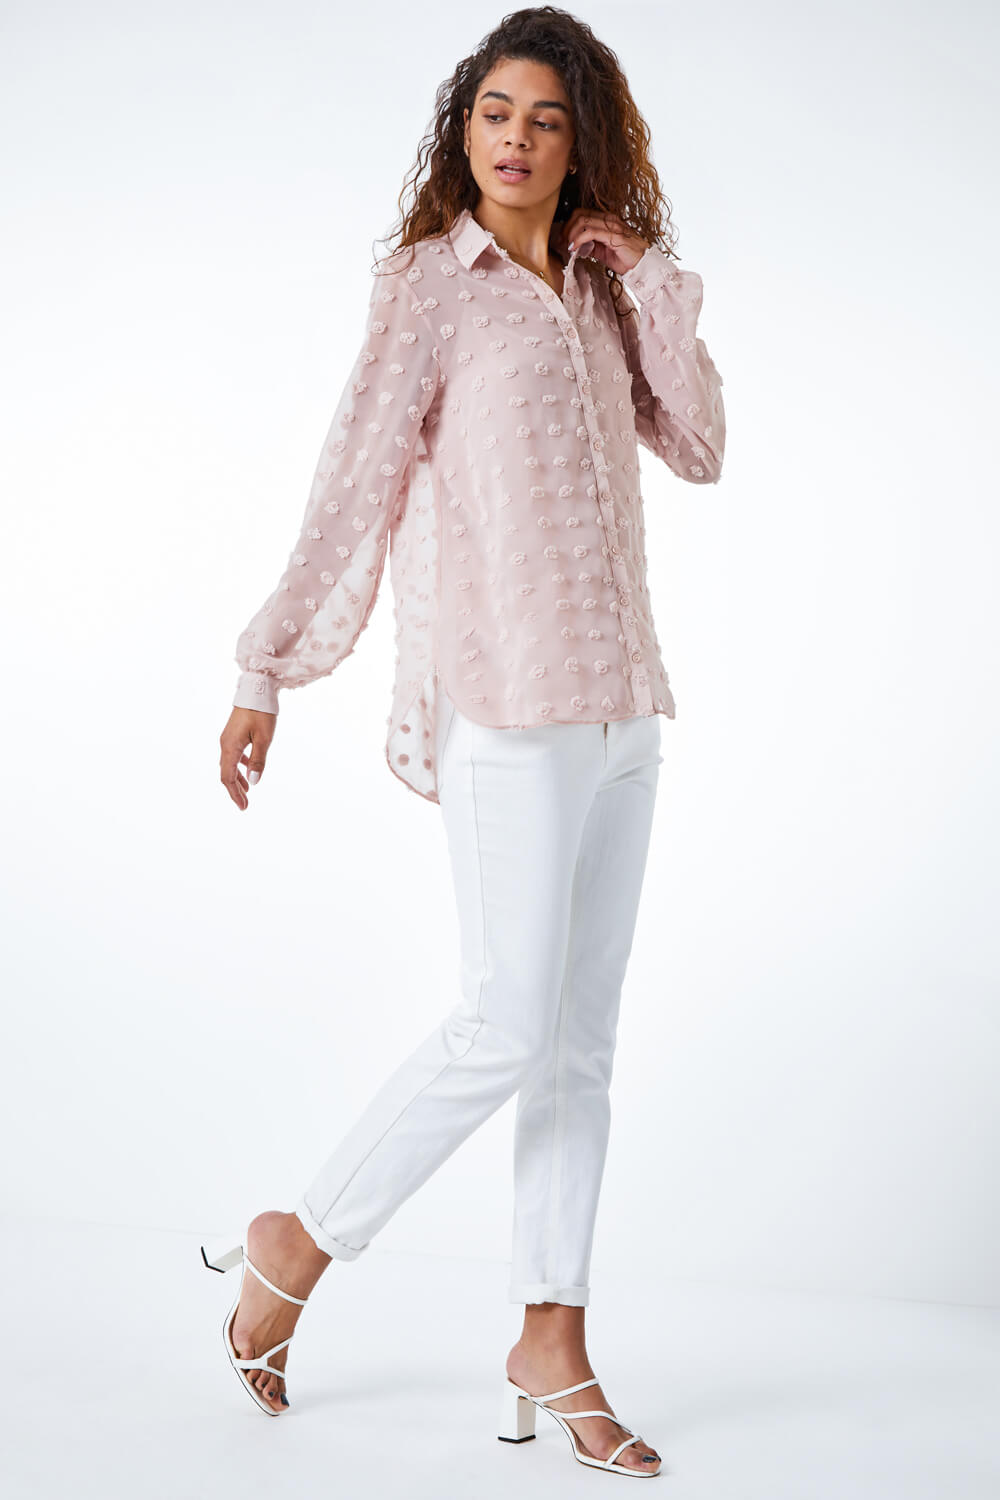 Light Pink Textured Spot Button Up Blouse, Image 2 of 5